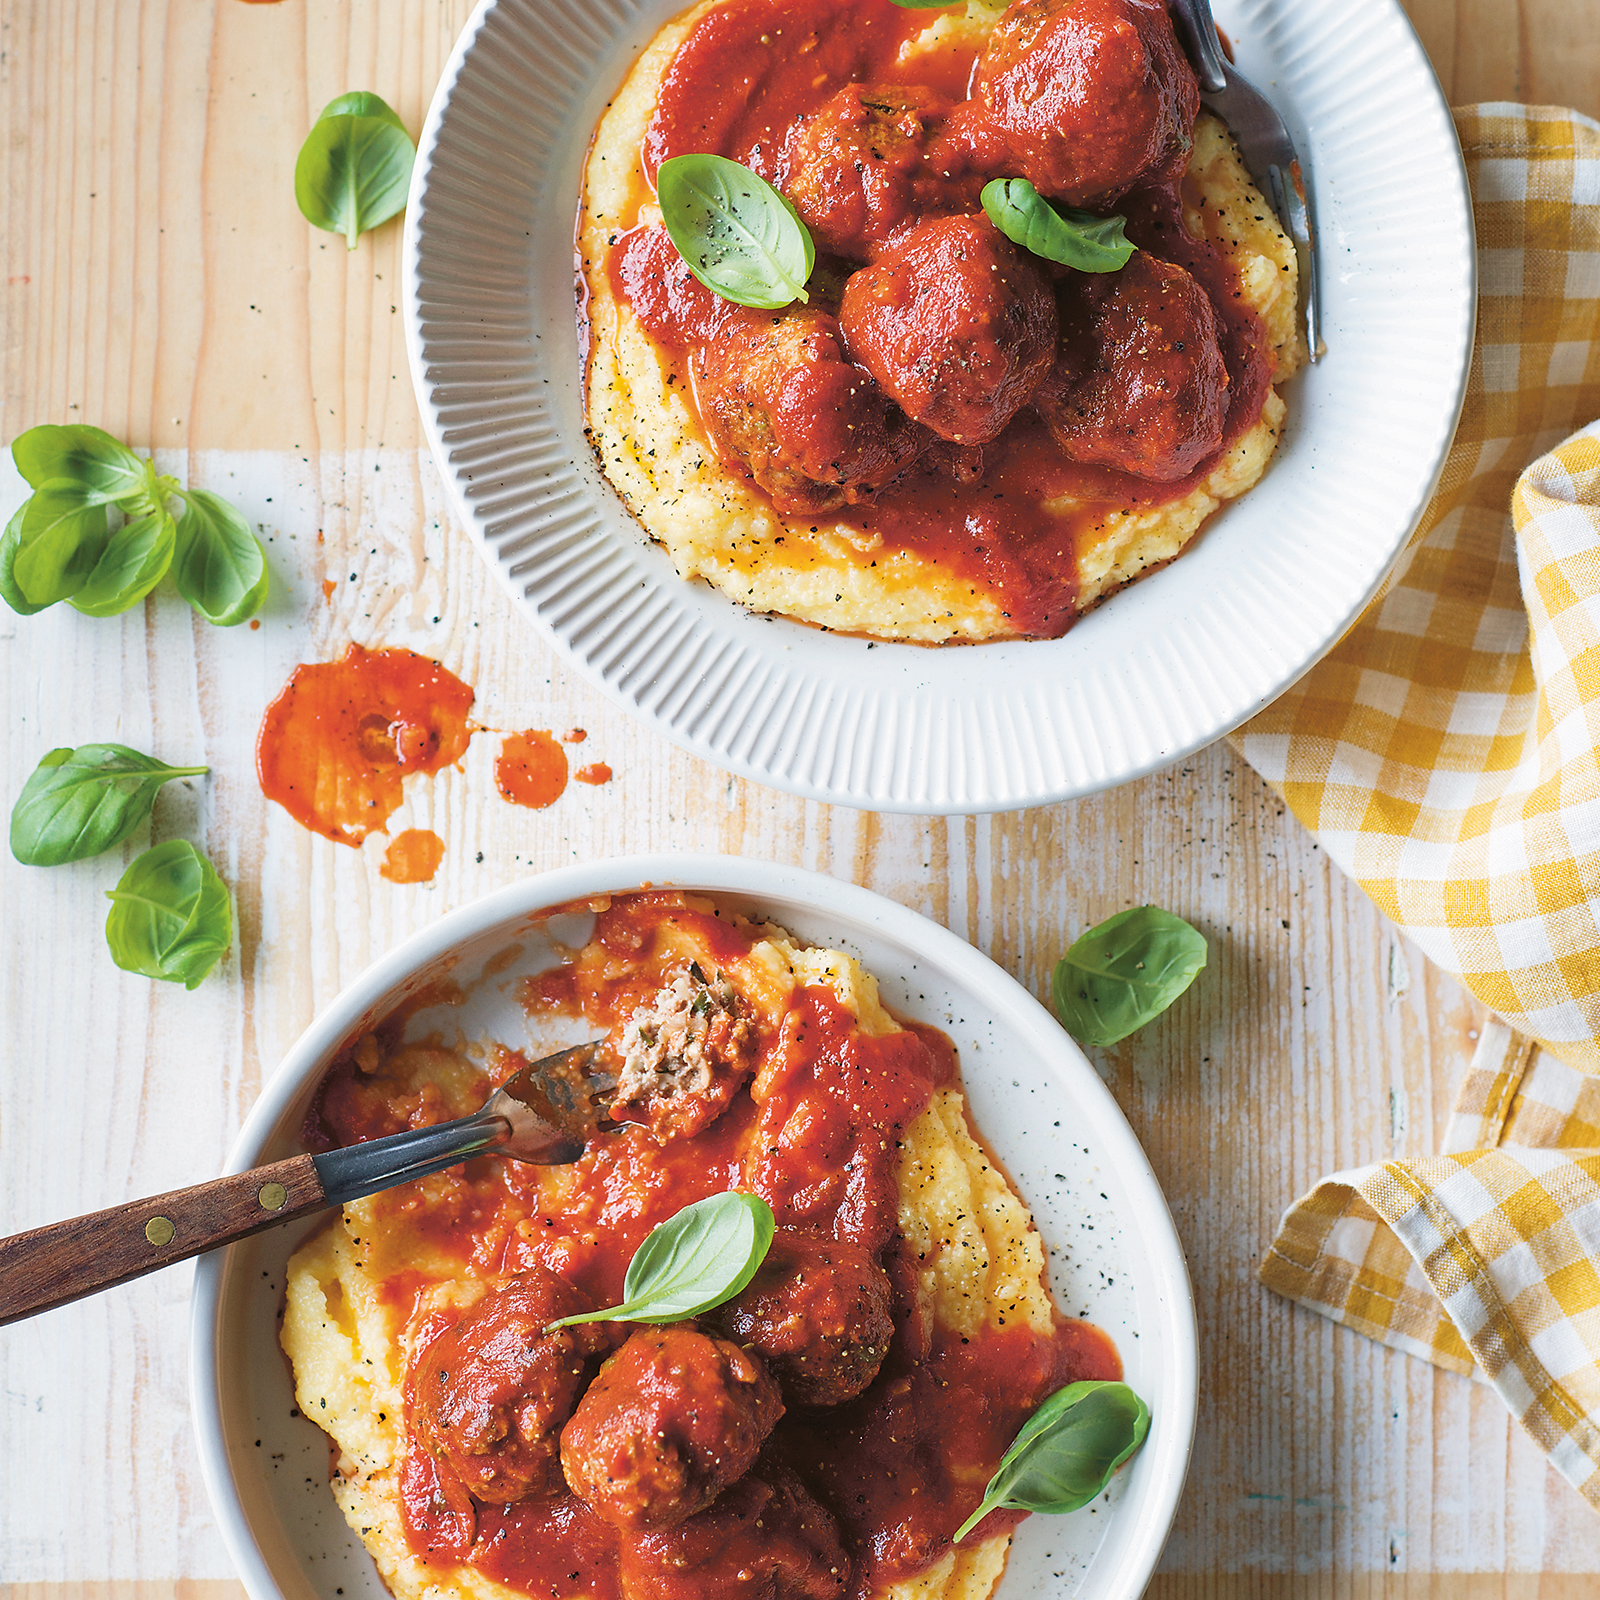 Two bowls of ricotta zucchini meatballs, served over soft polenta. Topped with fresh basil leaves.